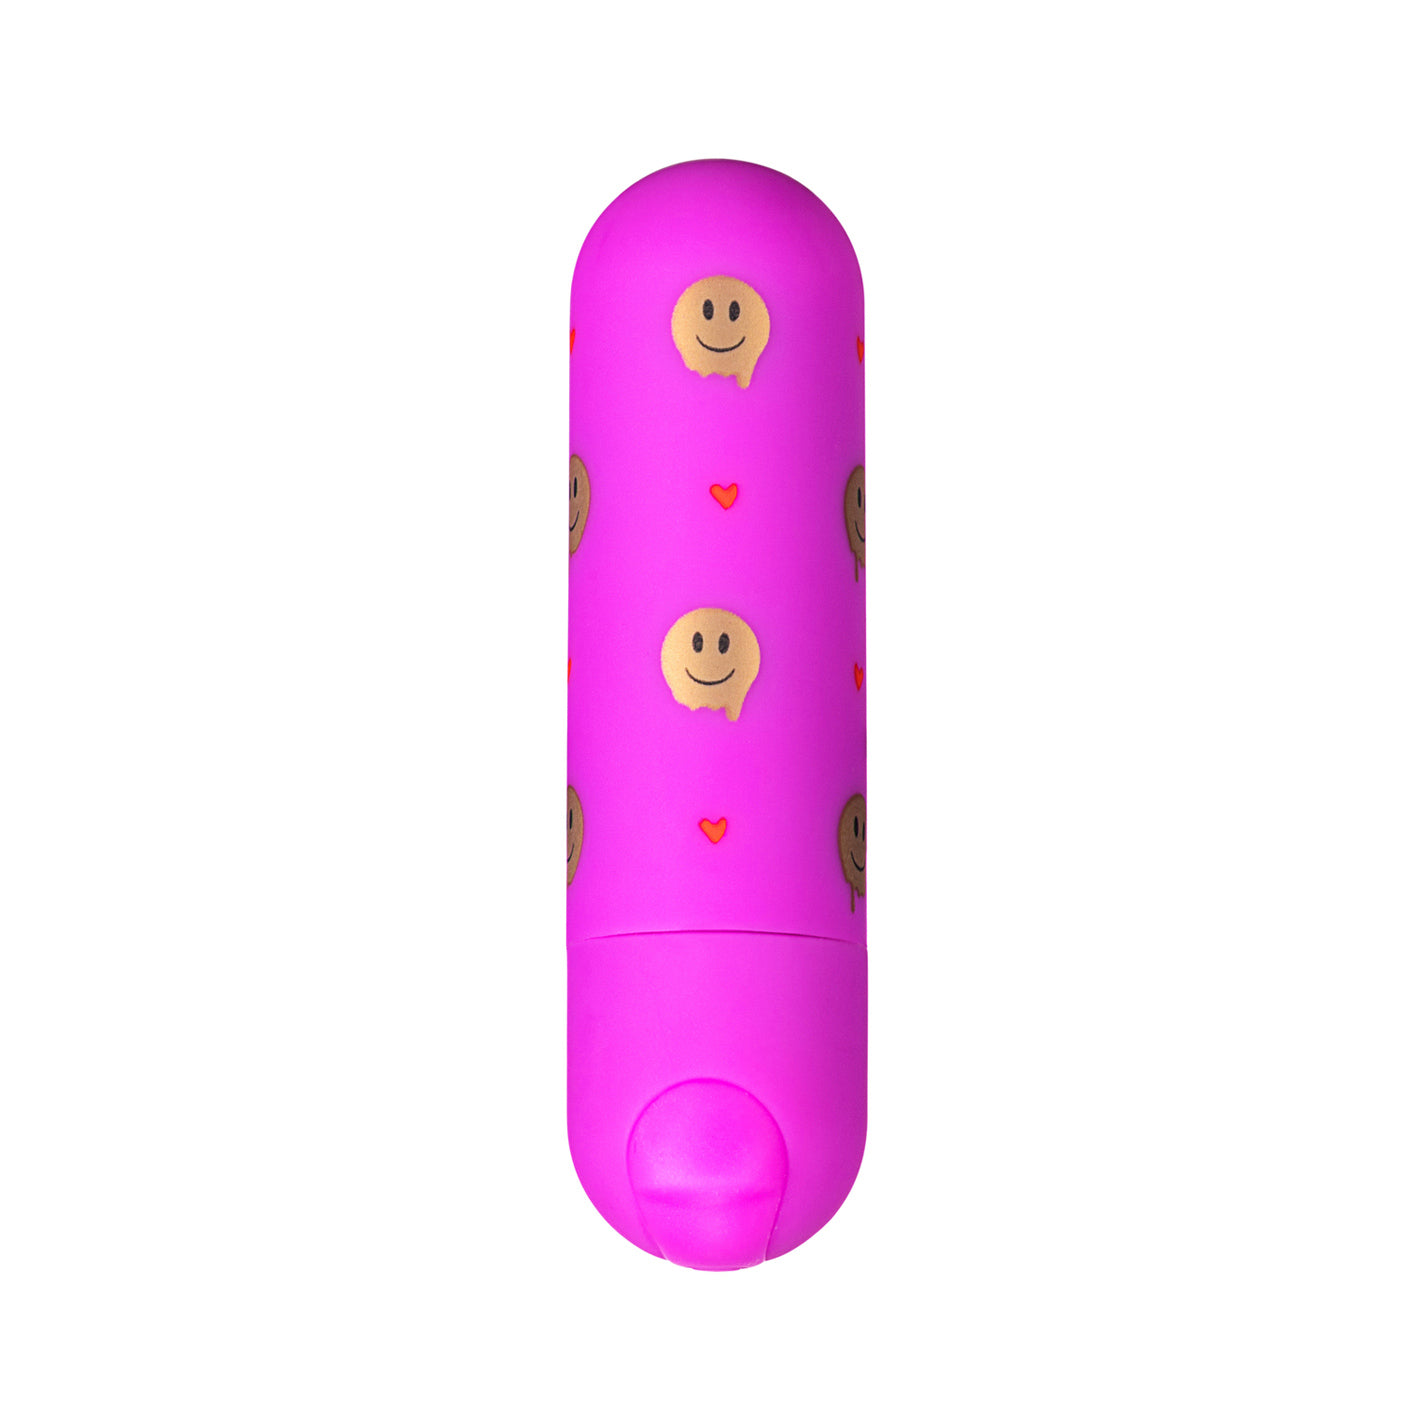 Giggly Super Charged Mini Bullet - Pink-3